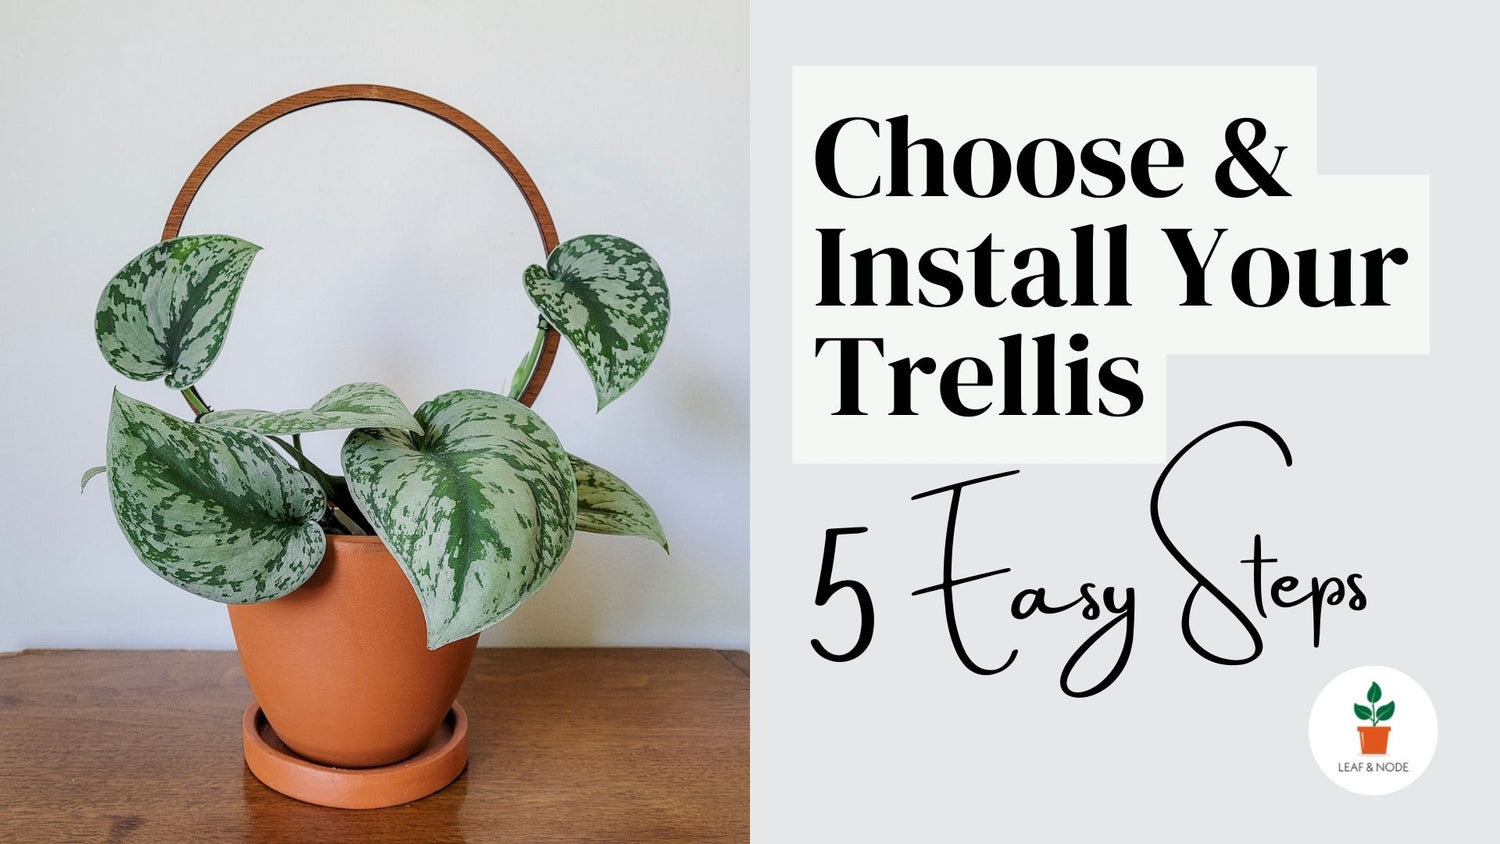 Load video: Video demonstrating how to select the best trellis for your plant and install it in your planter once it arrives.